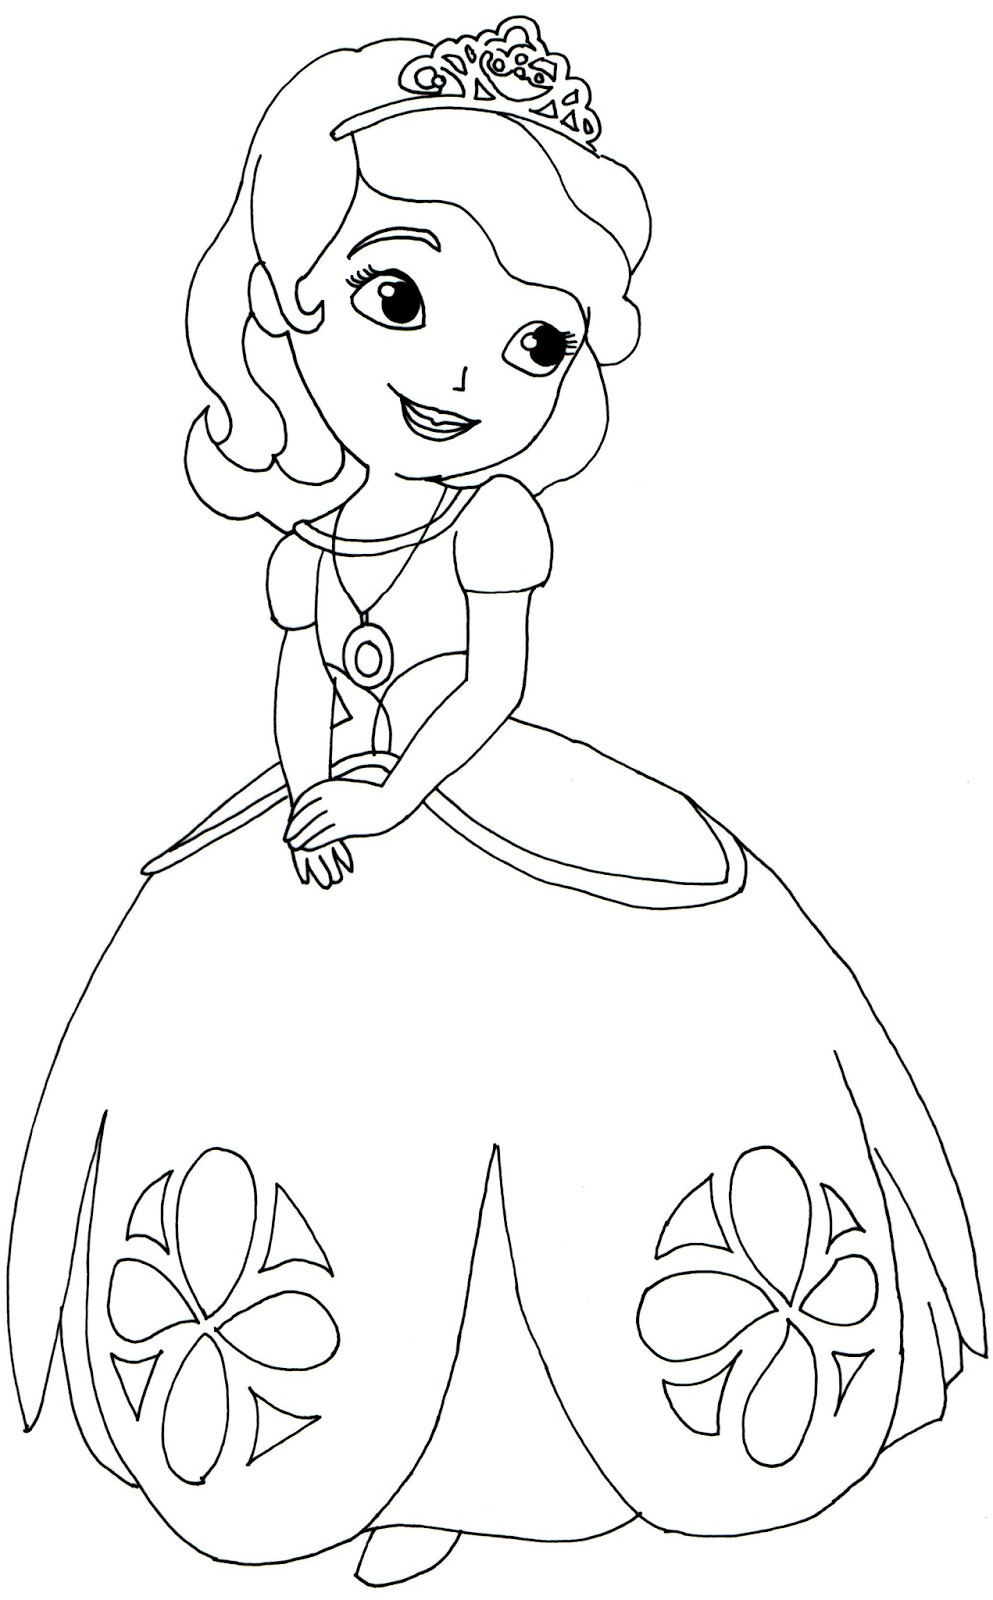 Sofia The First Coloring Pages
 Sofia The First Coloring Pages Sofia the First Coloring Page